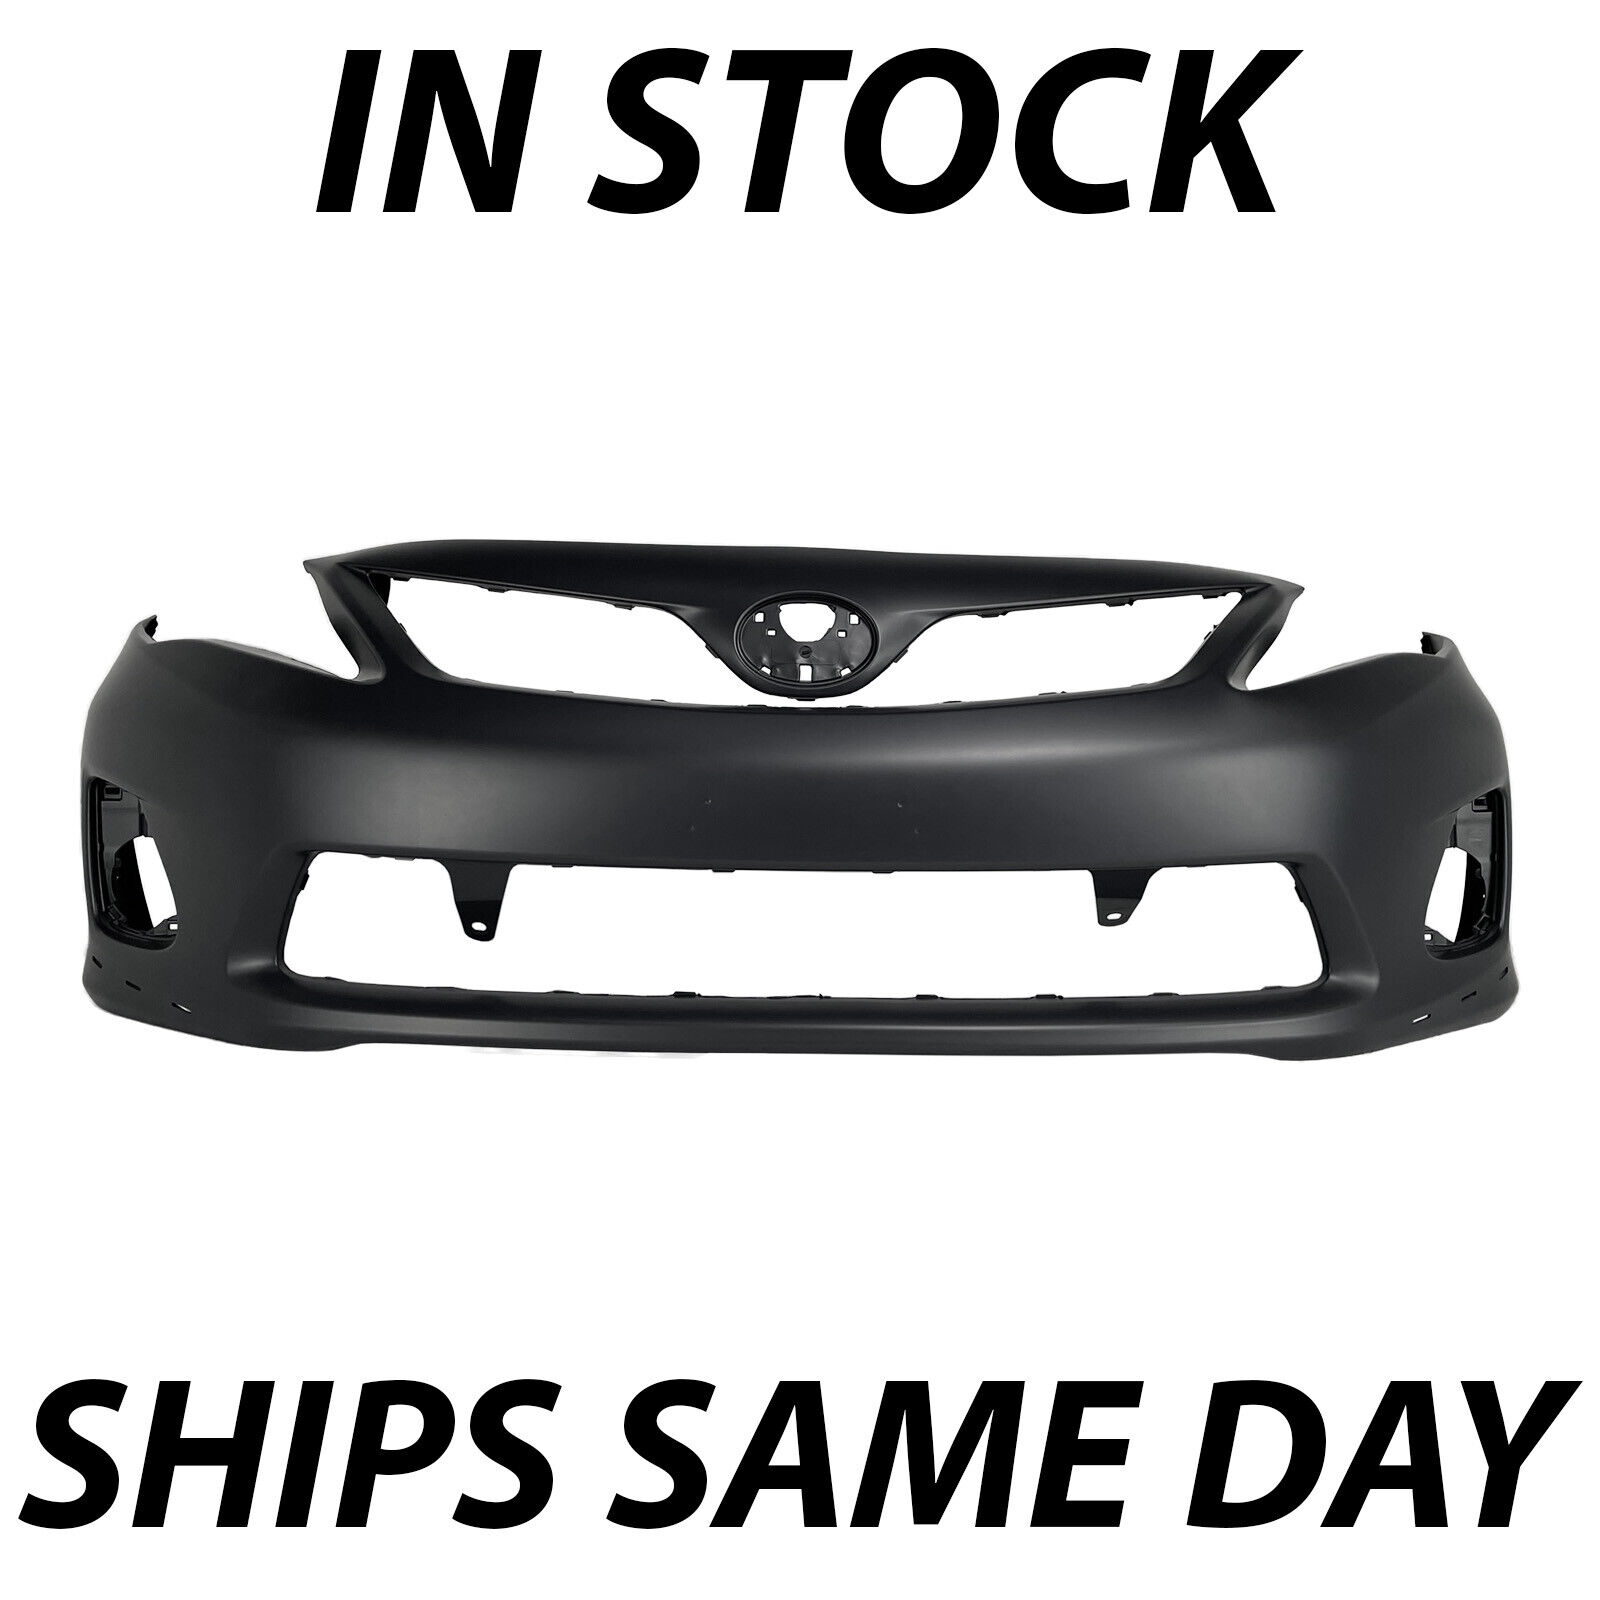 NEW Primered Front Bumper Cover for 2011-2013 Toyota Corolla S and XRS TO1000373